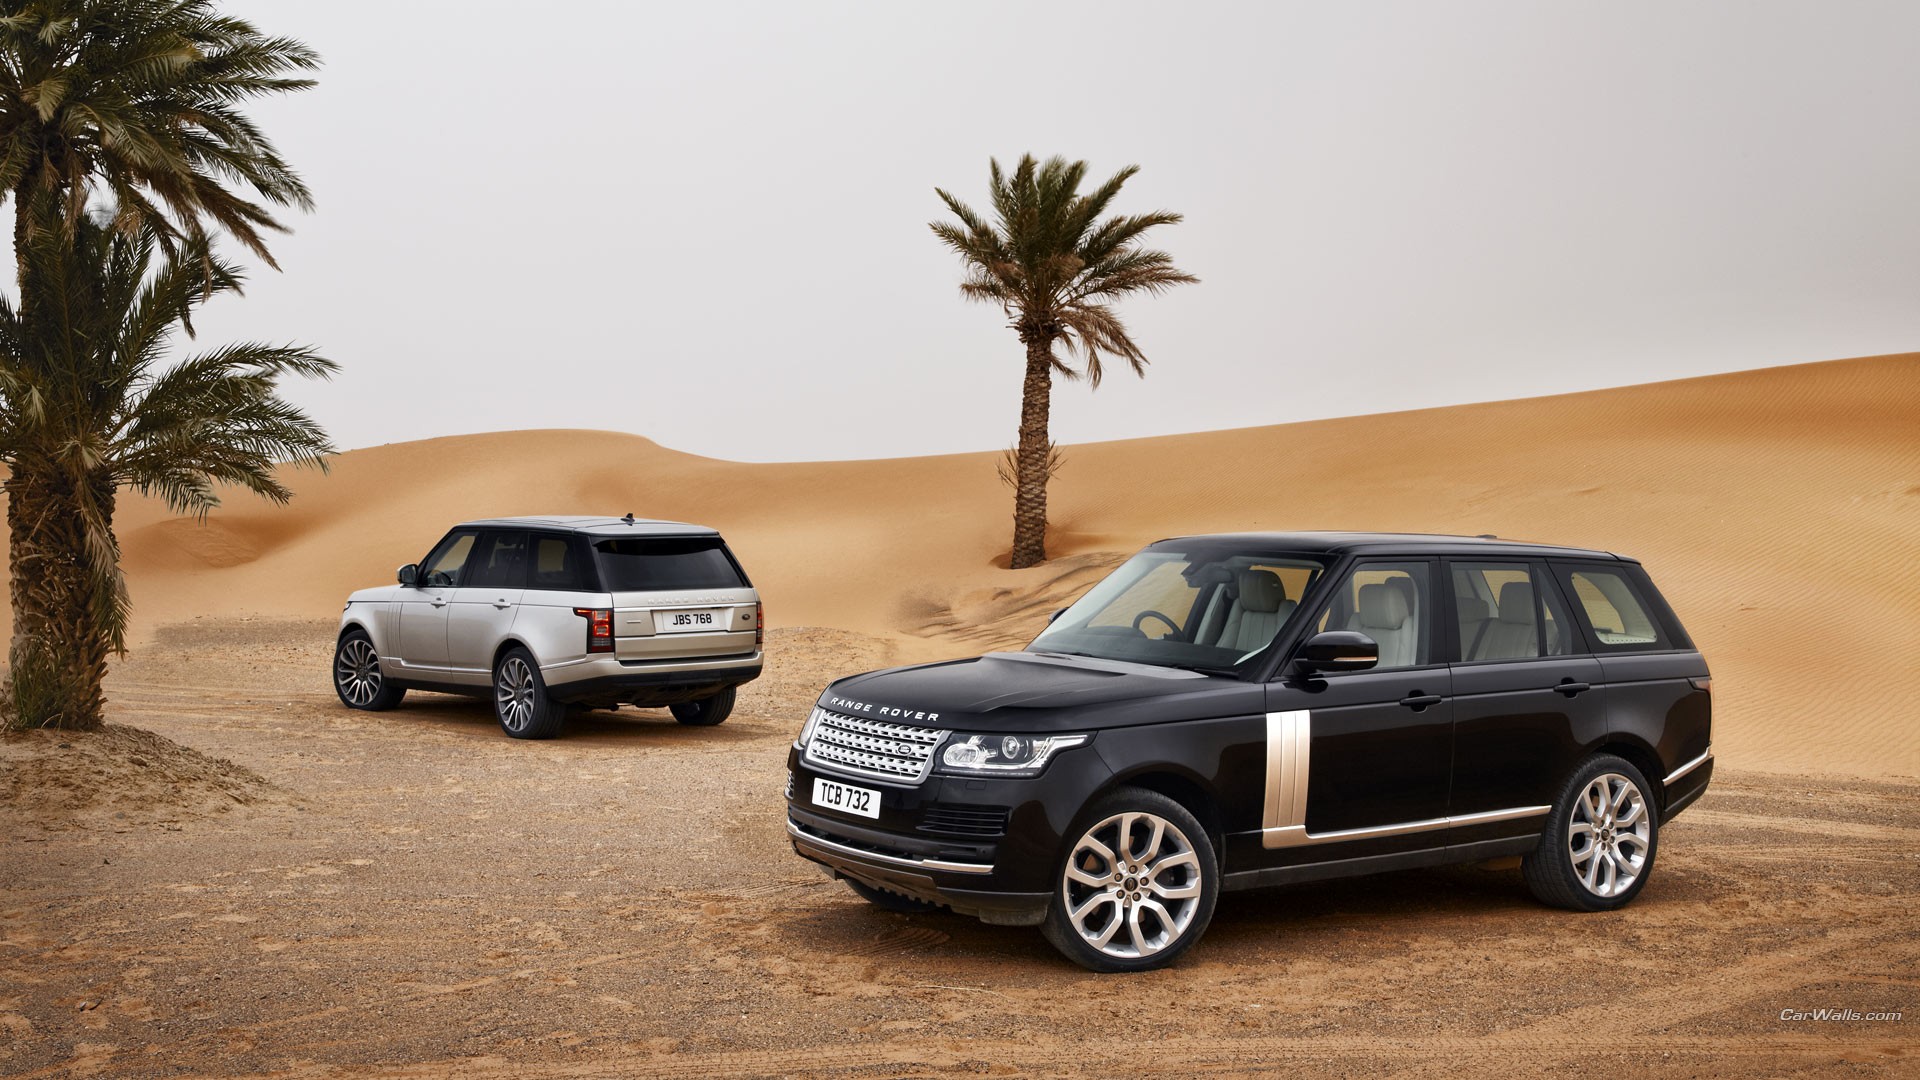 General 1920x1080 Range Rover palm trees car vehicle sand black cars silver cars Land Rover offroad watermarked British cars SUV